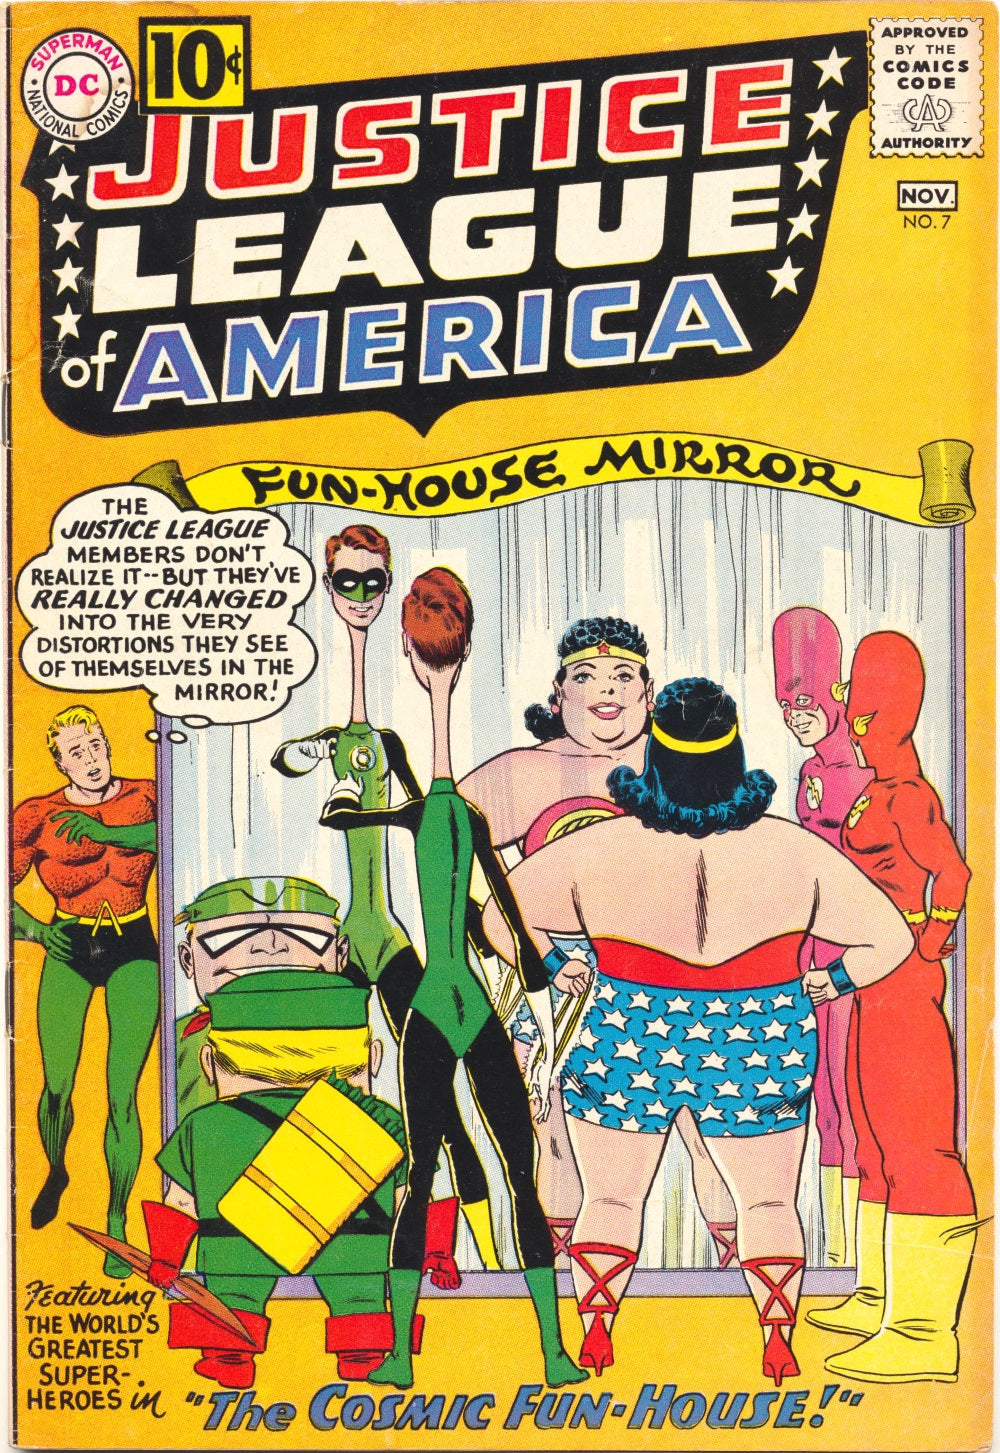 JUSTICE LEAGUE OF AMERICA 7 VG+ (4.5)